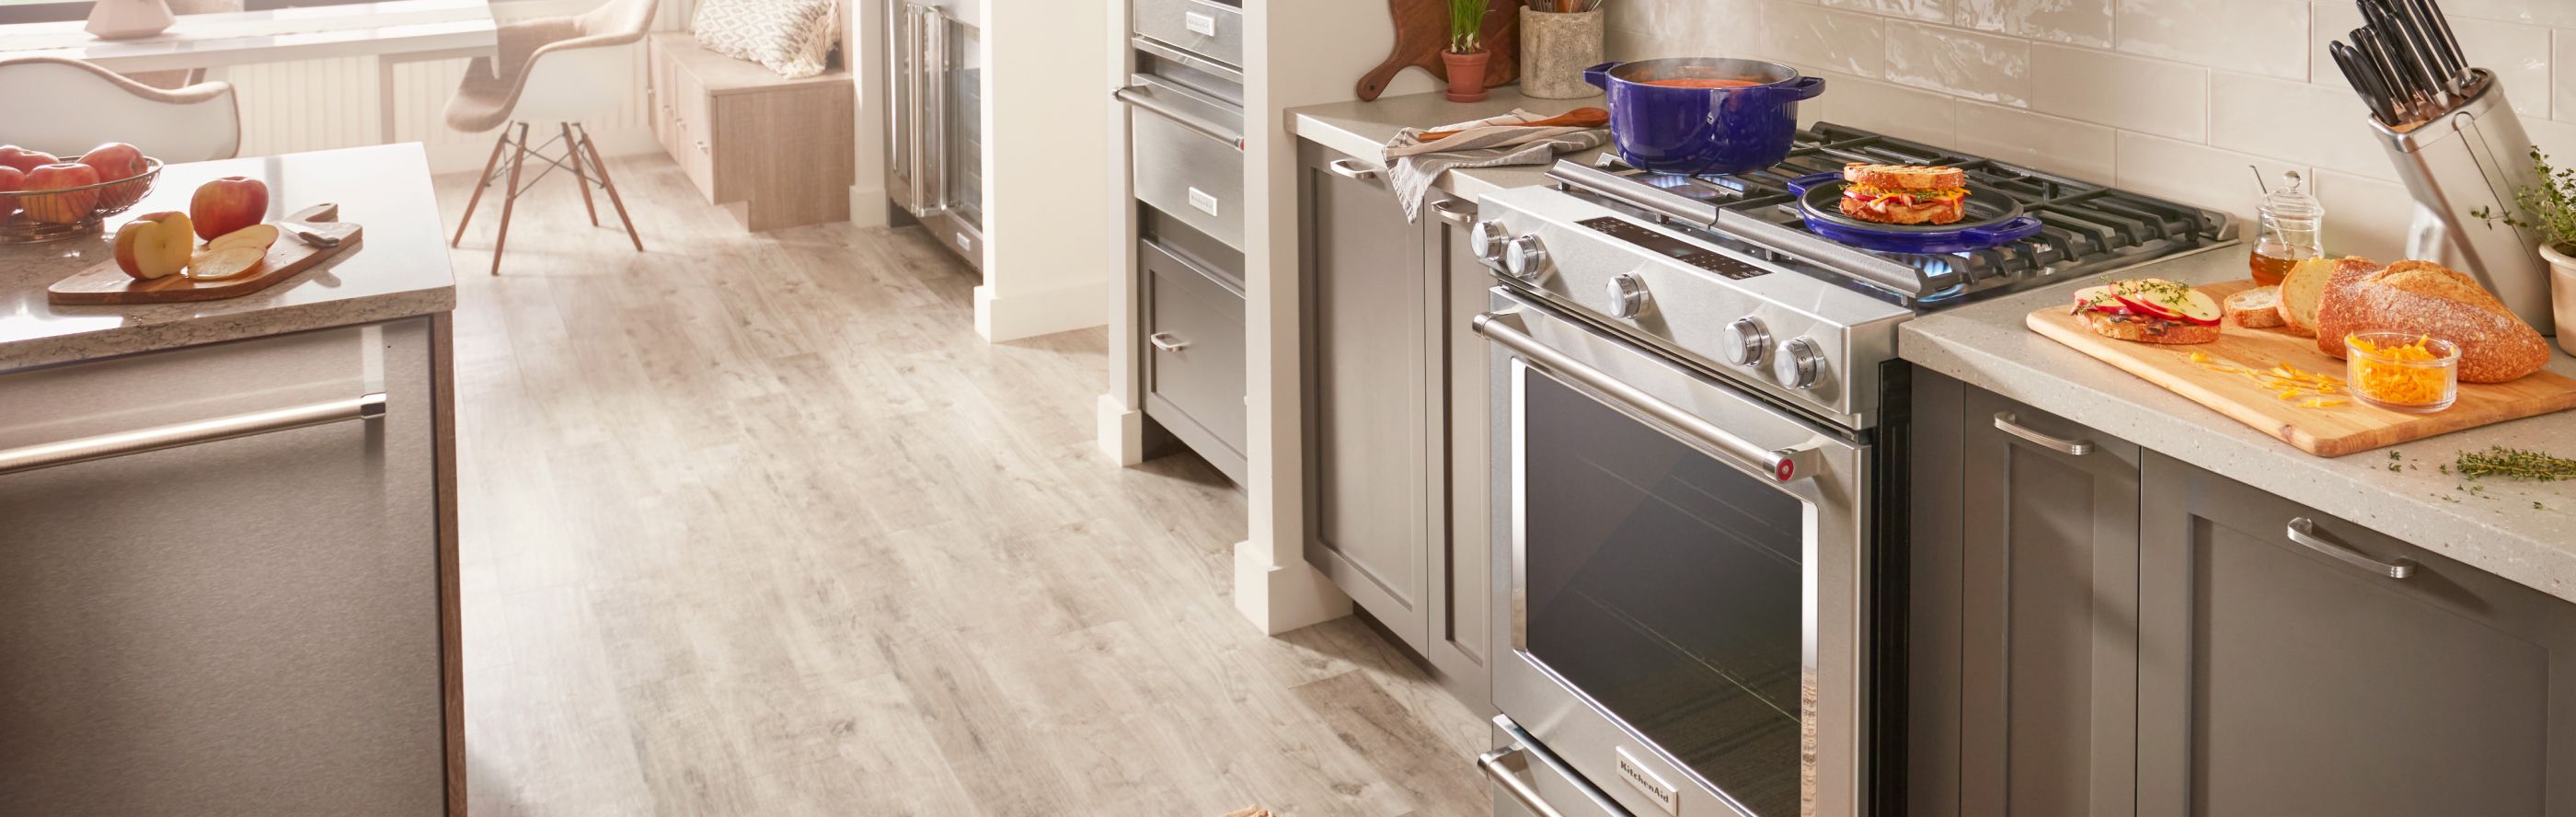 A KitchenAid® gas stove in the middle of a kitchen